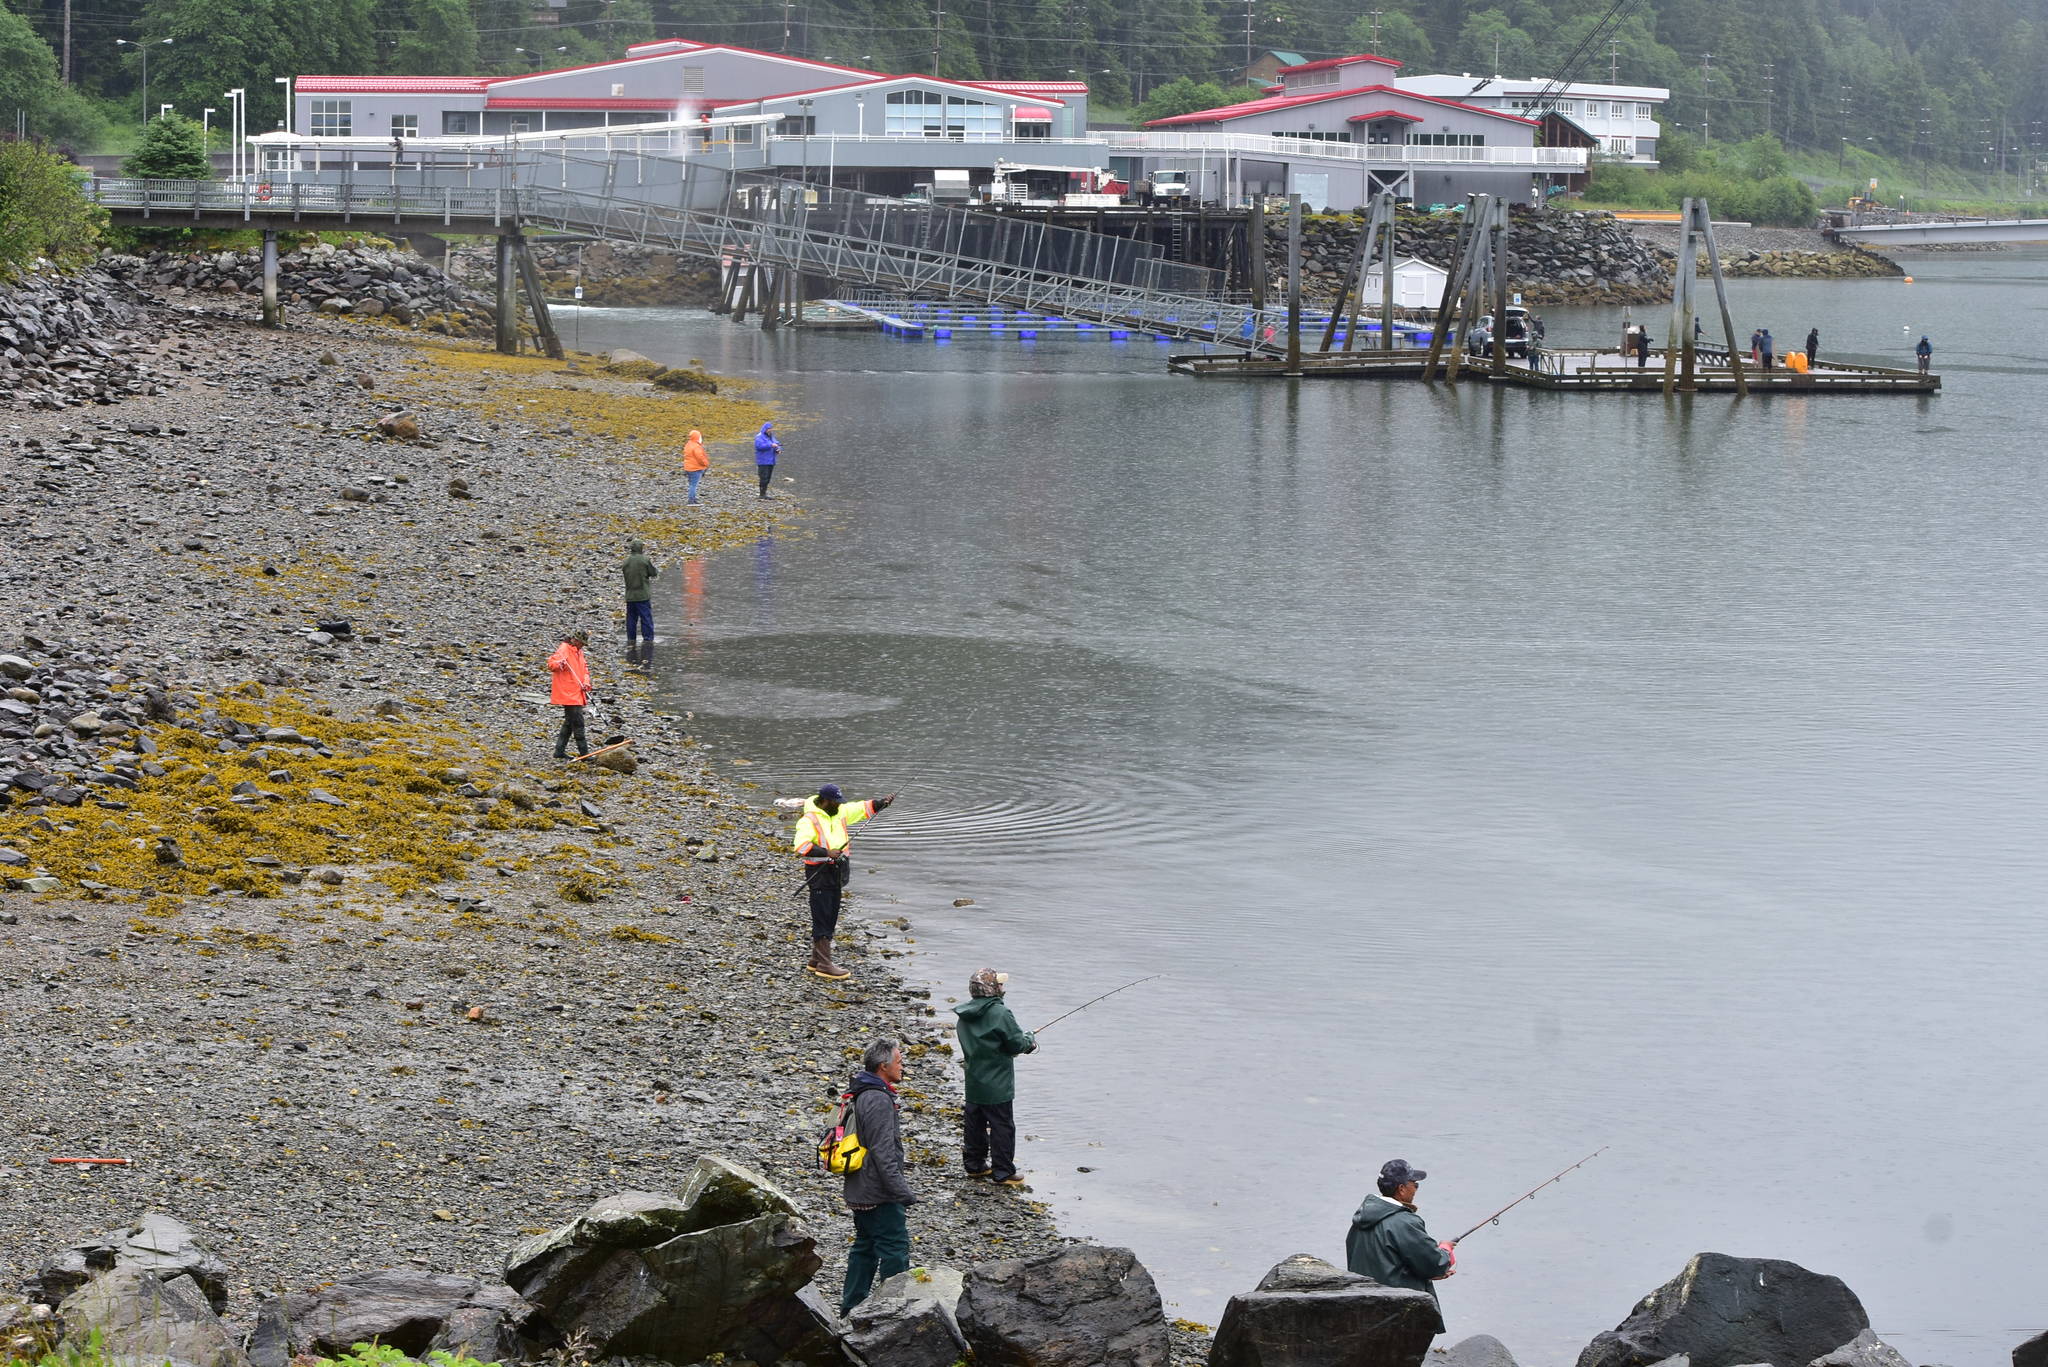 Peter Segall | Juneau Empire                                Fishermen along Channel Drive in Juneau on Friday, June 26, 2020. The Douglas Island Pink and Chum hatchery, seen in the distance, has reported much smaller returns of chum salmon this year. Hatchery officials are concerned about getting enough fish to maintain their broodstock.